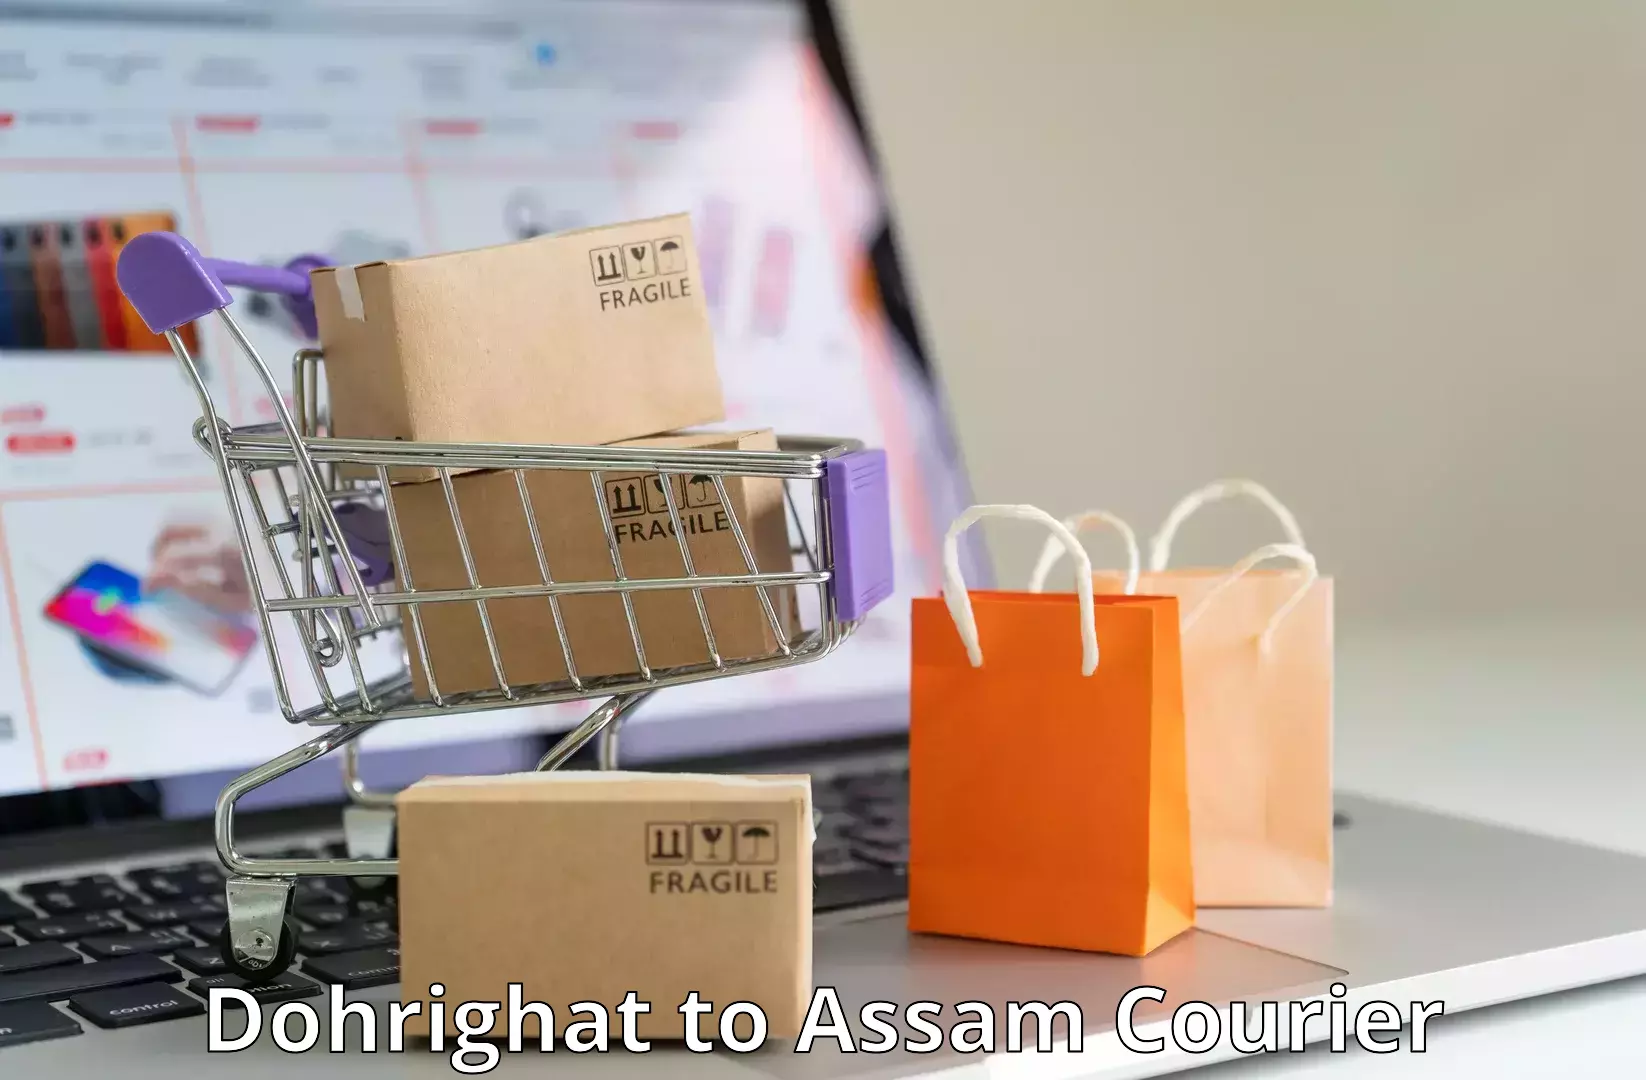 Advanced courier platforms Dohrighat to Mariani